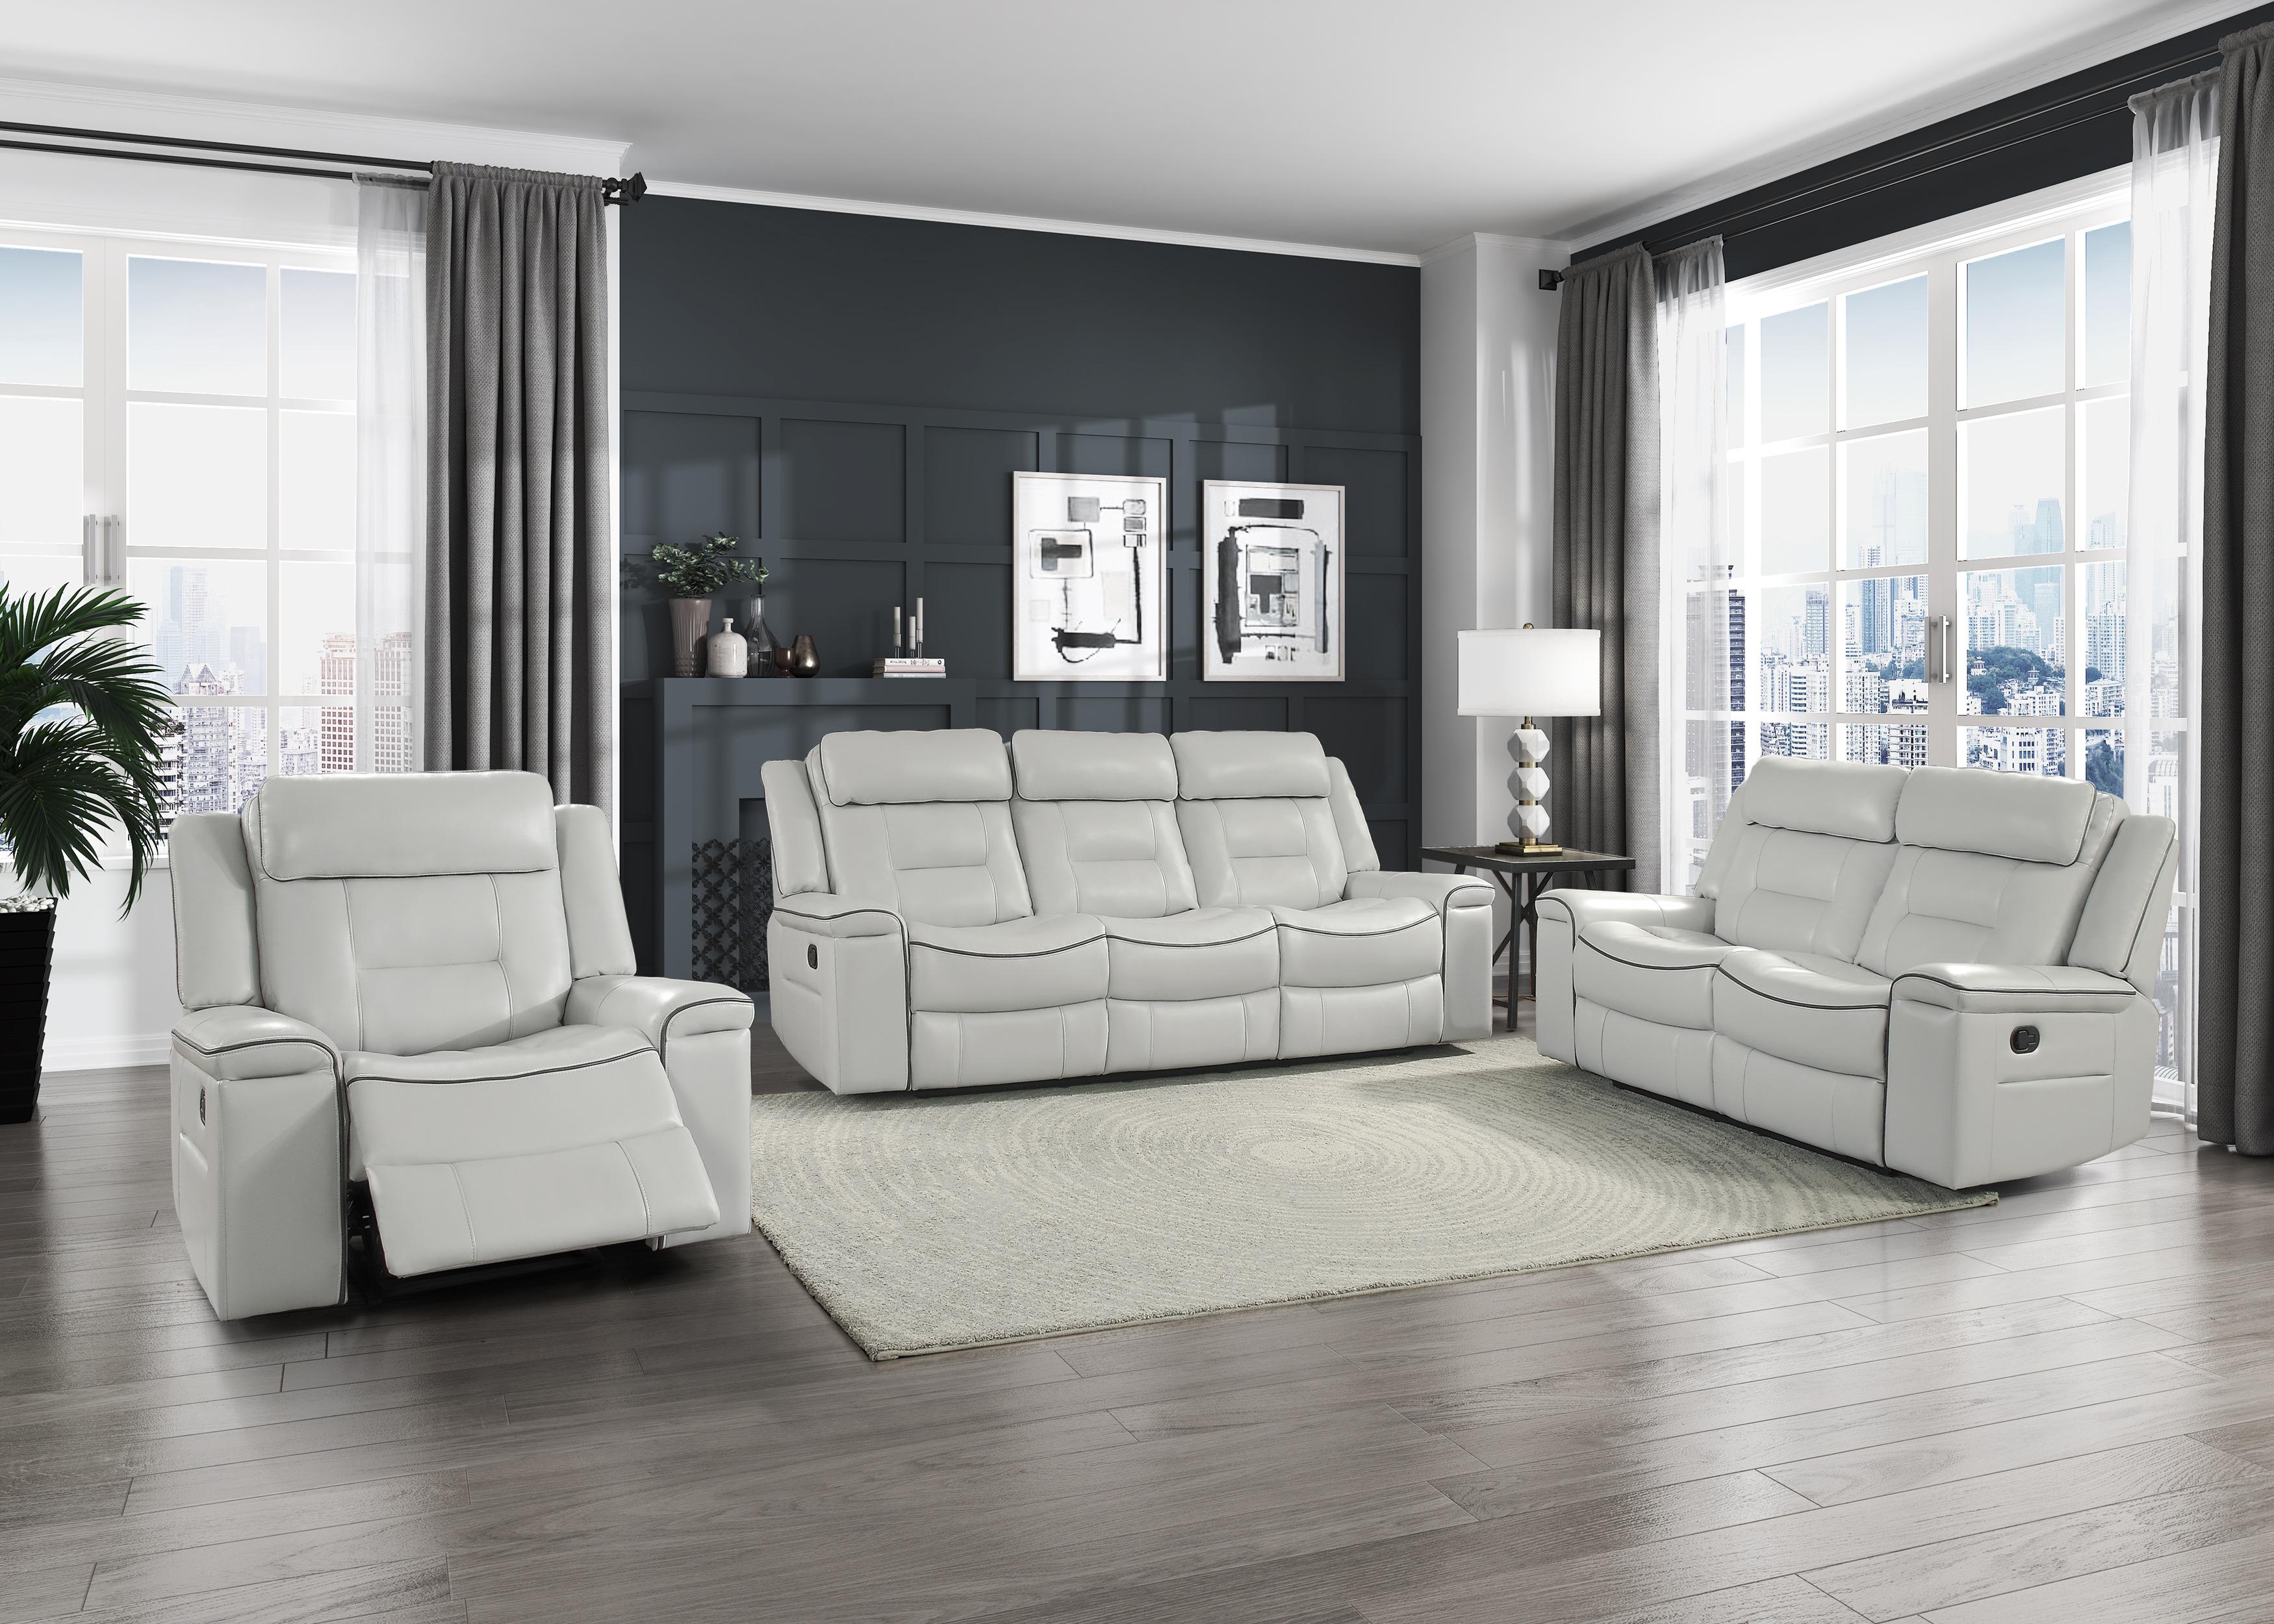 

    
Contemporary Light Gray Faux Leather Reclining Sofa Set 3pcs Homelegance 9999GY Darwan
